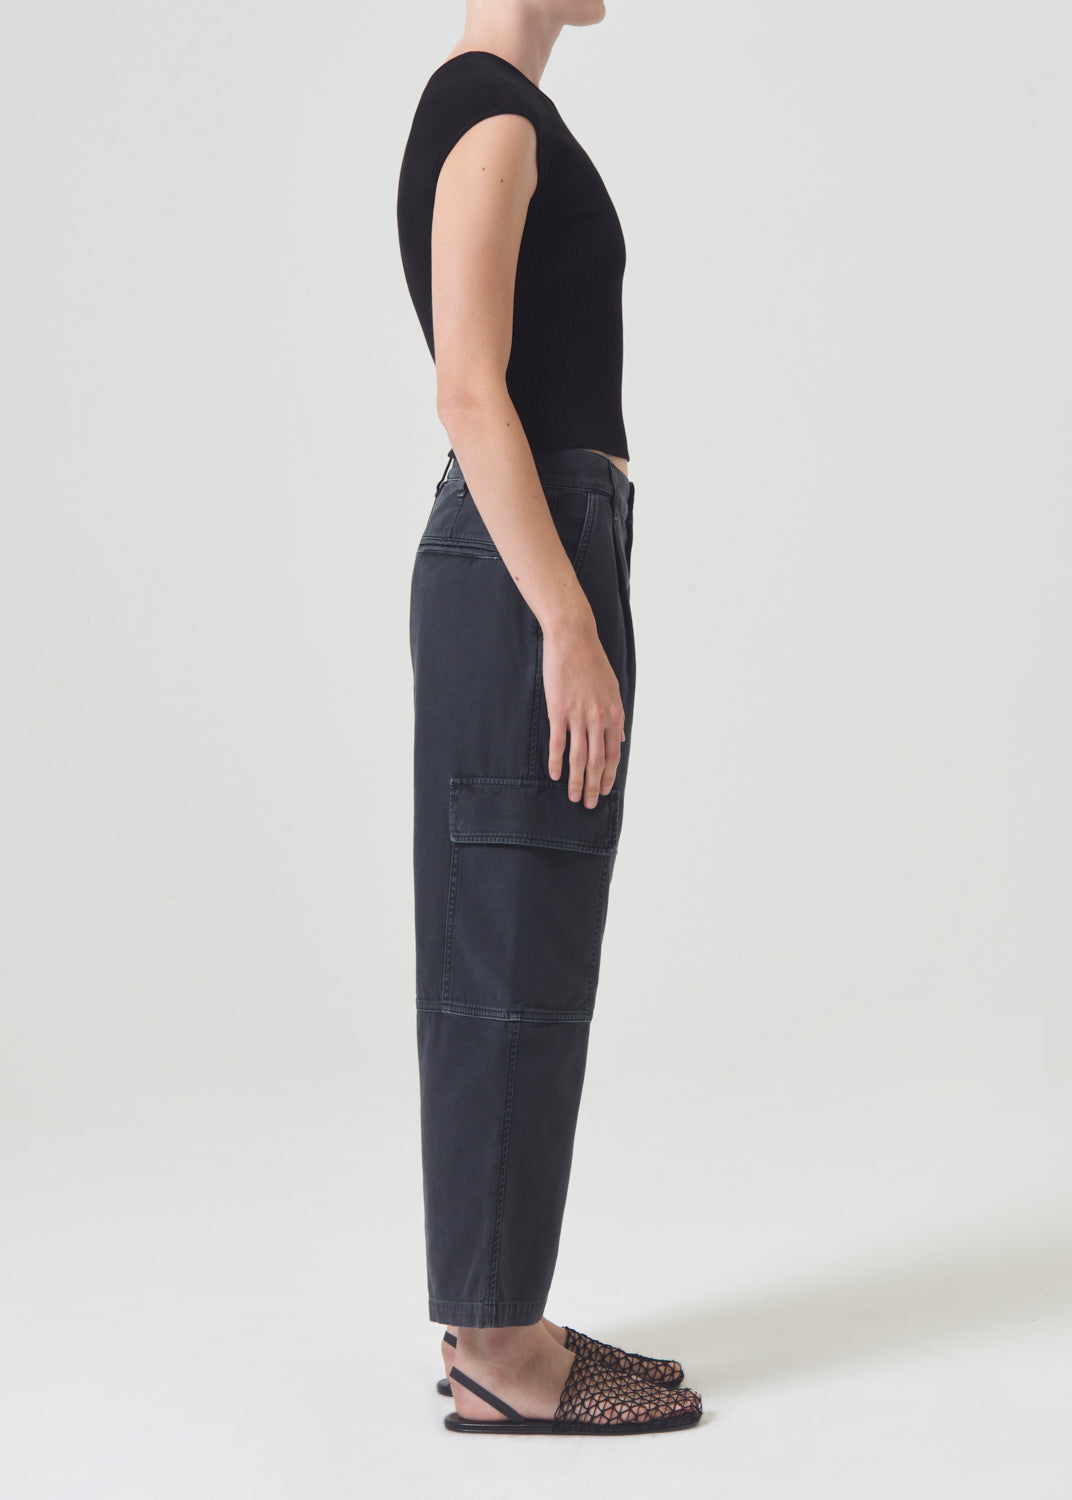 Jericho Pant in Vulture